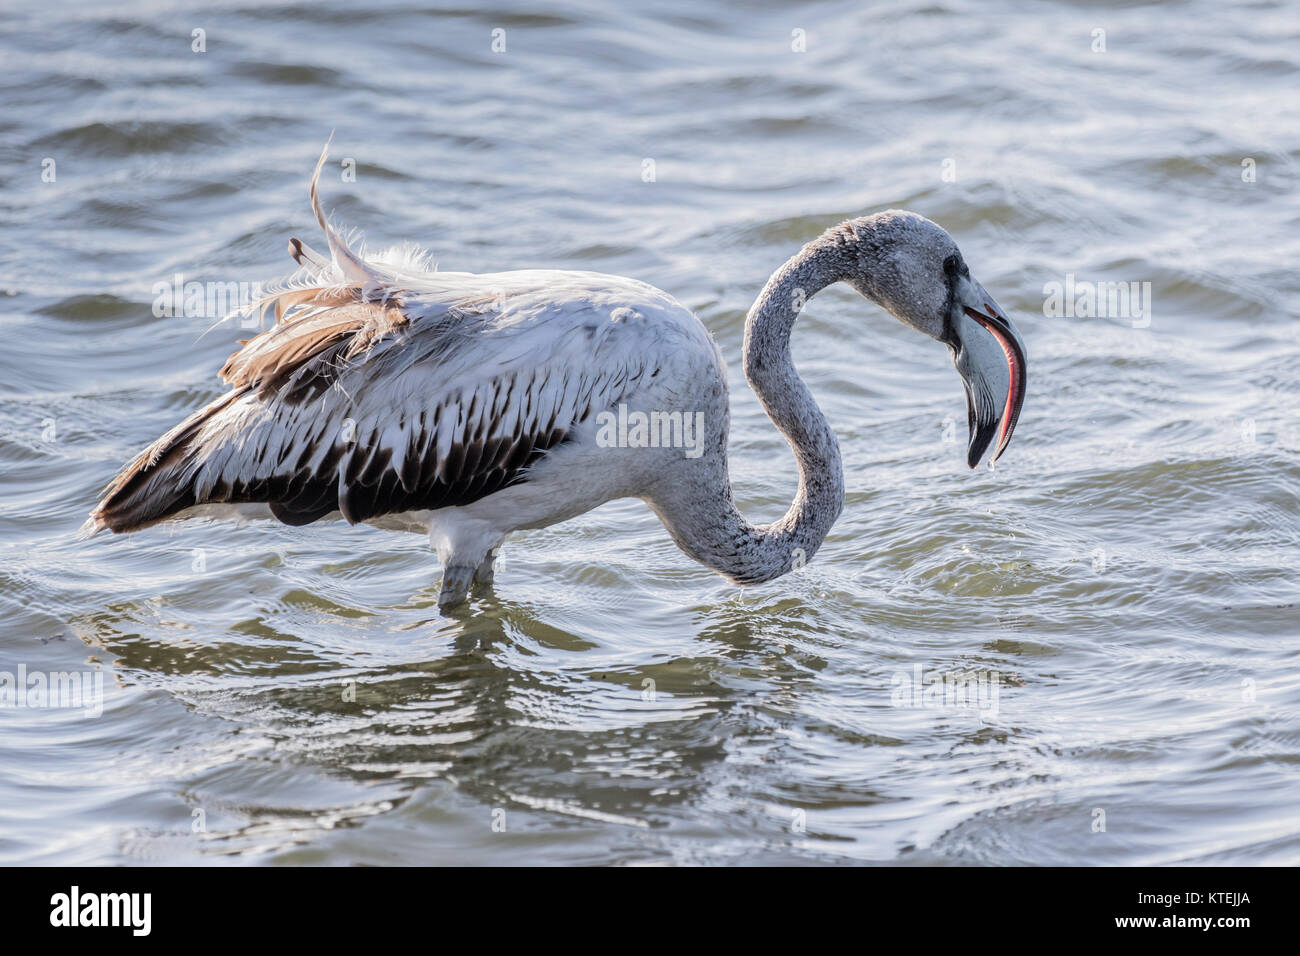 A sub-adult greater flamingo opening its bill to filter-feed in Walvis Bay Lagoon, Namibia Stock Photo